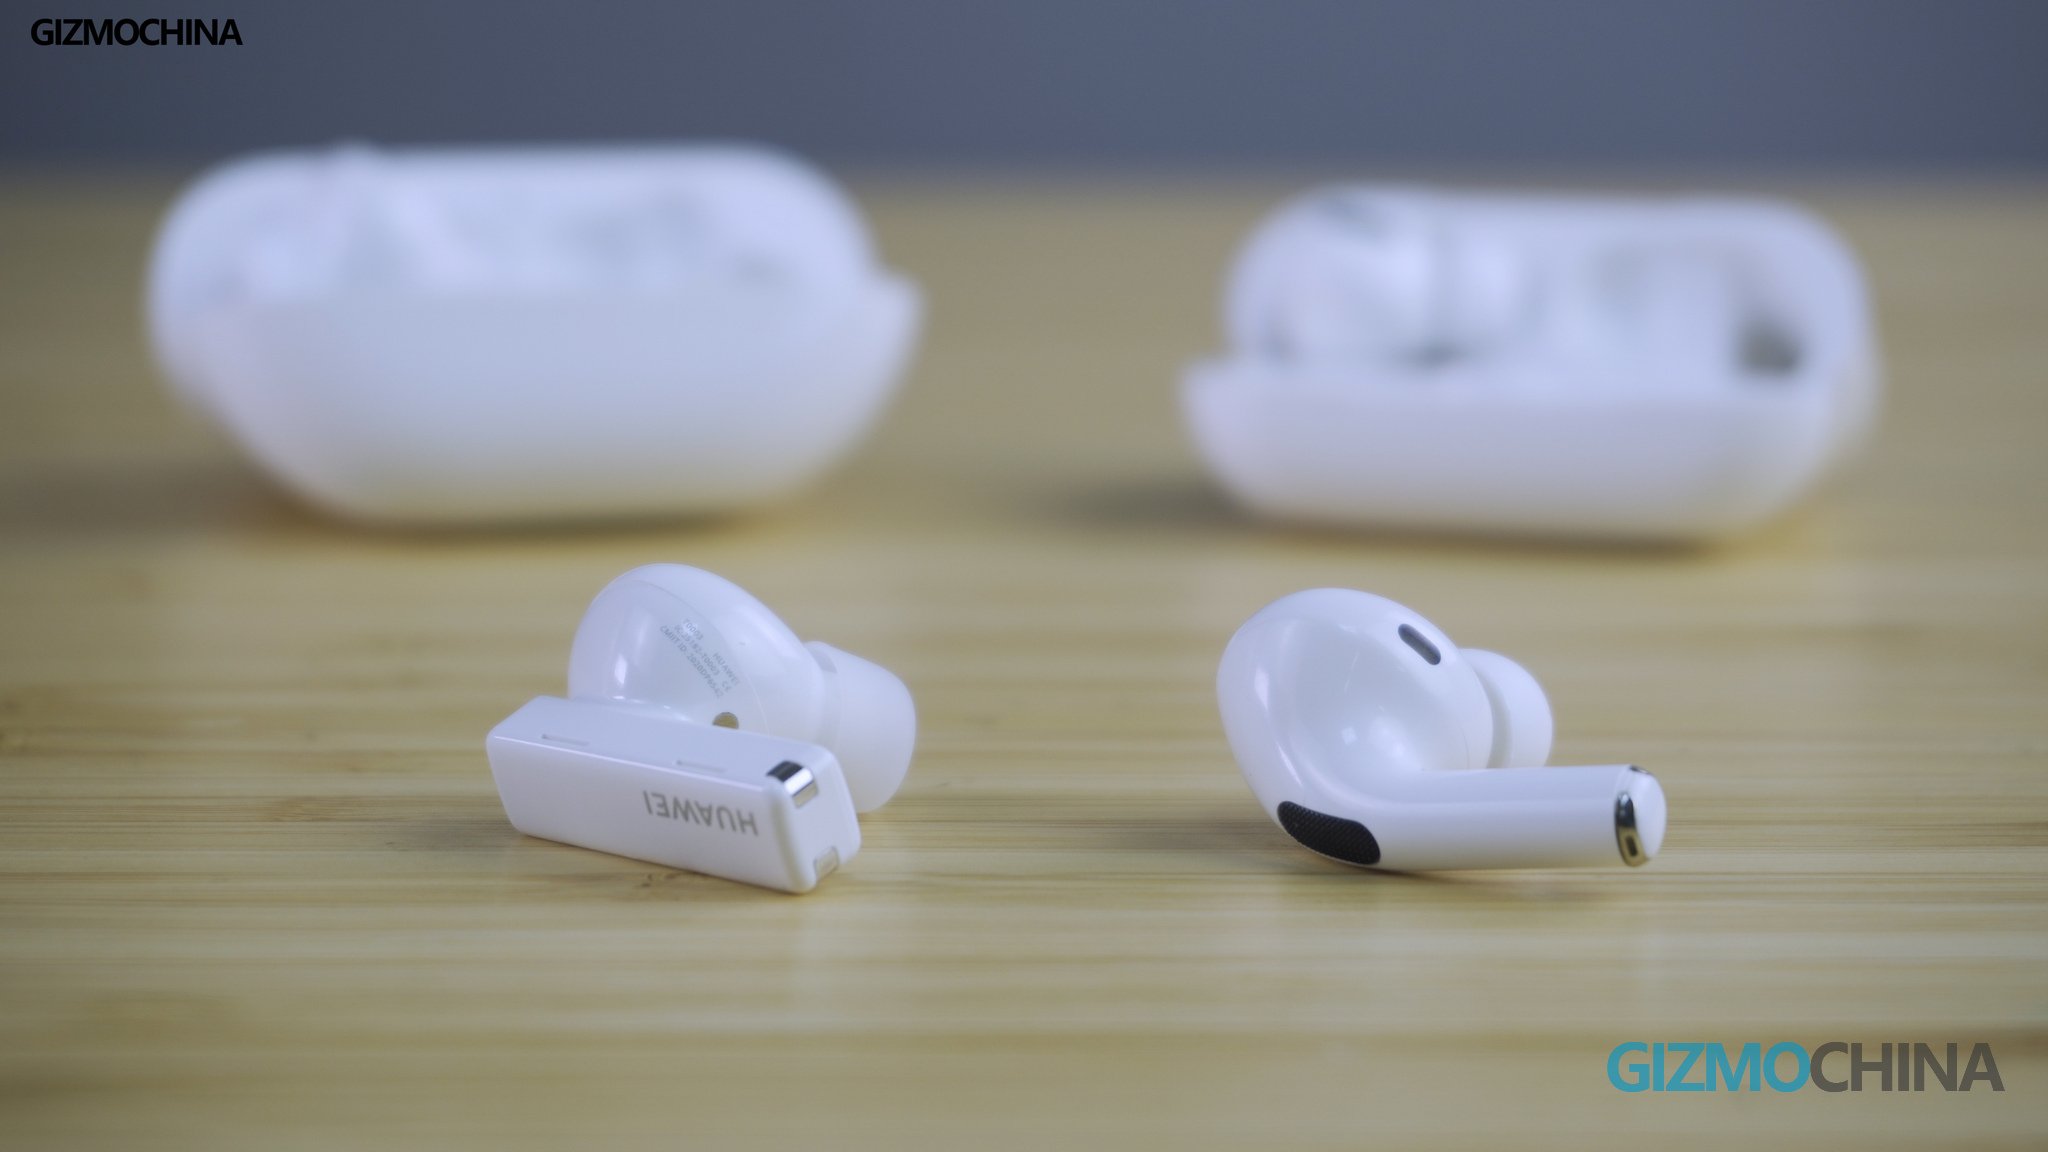 Huawei Freebuds Pro ANC earbuds vs airpods pro